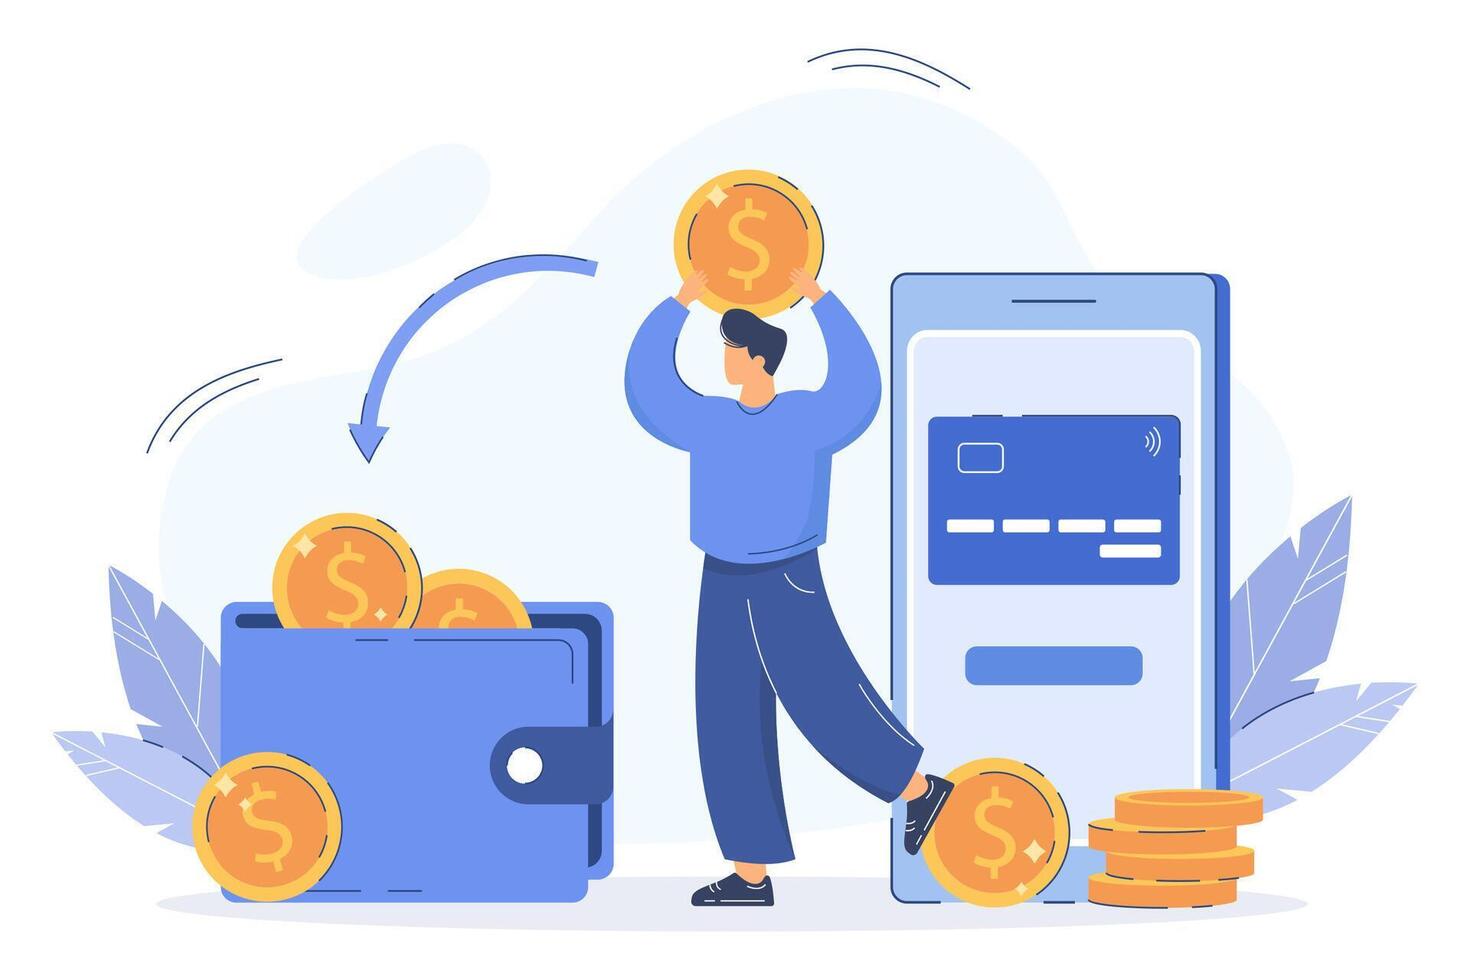 Flat man paying online and receiving cashback to e-wallet. Bonus money or reward back on credit card for purchase. Coins transfer from smartphone to wallet. Cash refund. Financial savings concept vector